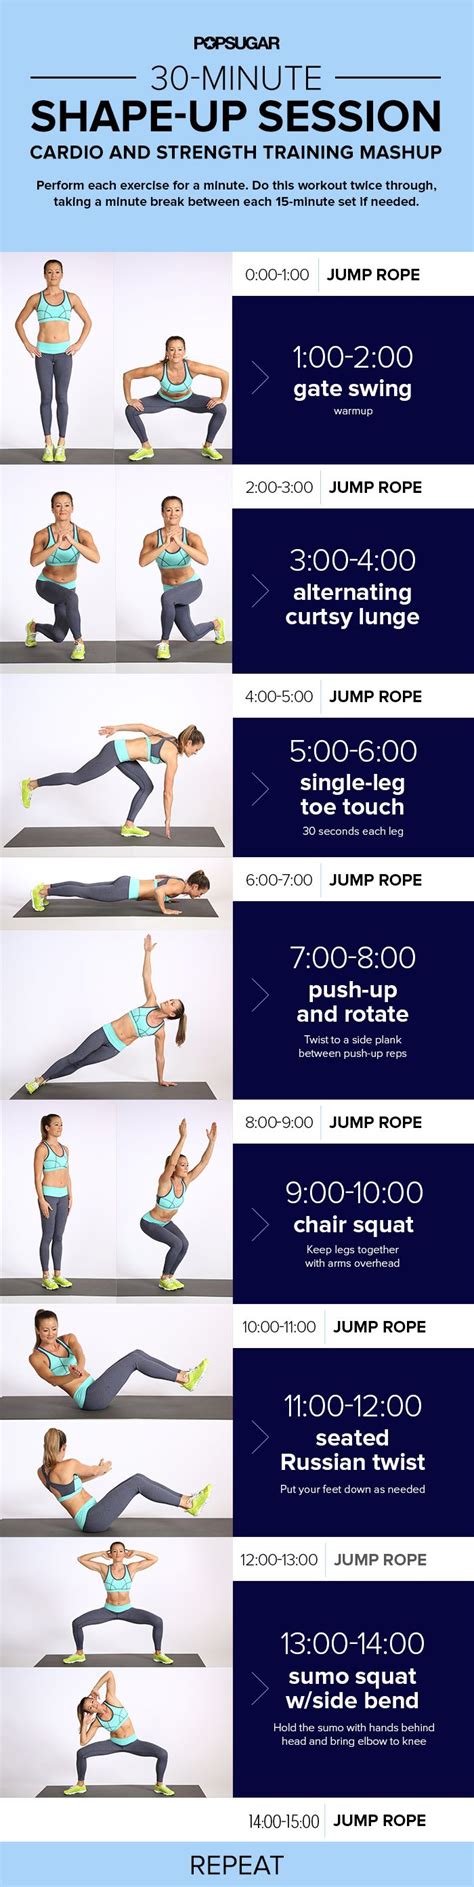 27 Hourglass Body Workouts That Will Give You An Amazing Fit Body